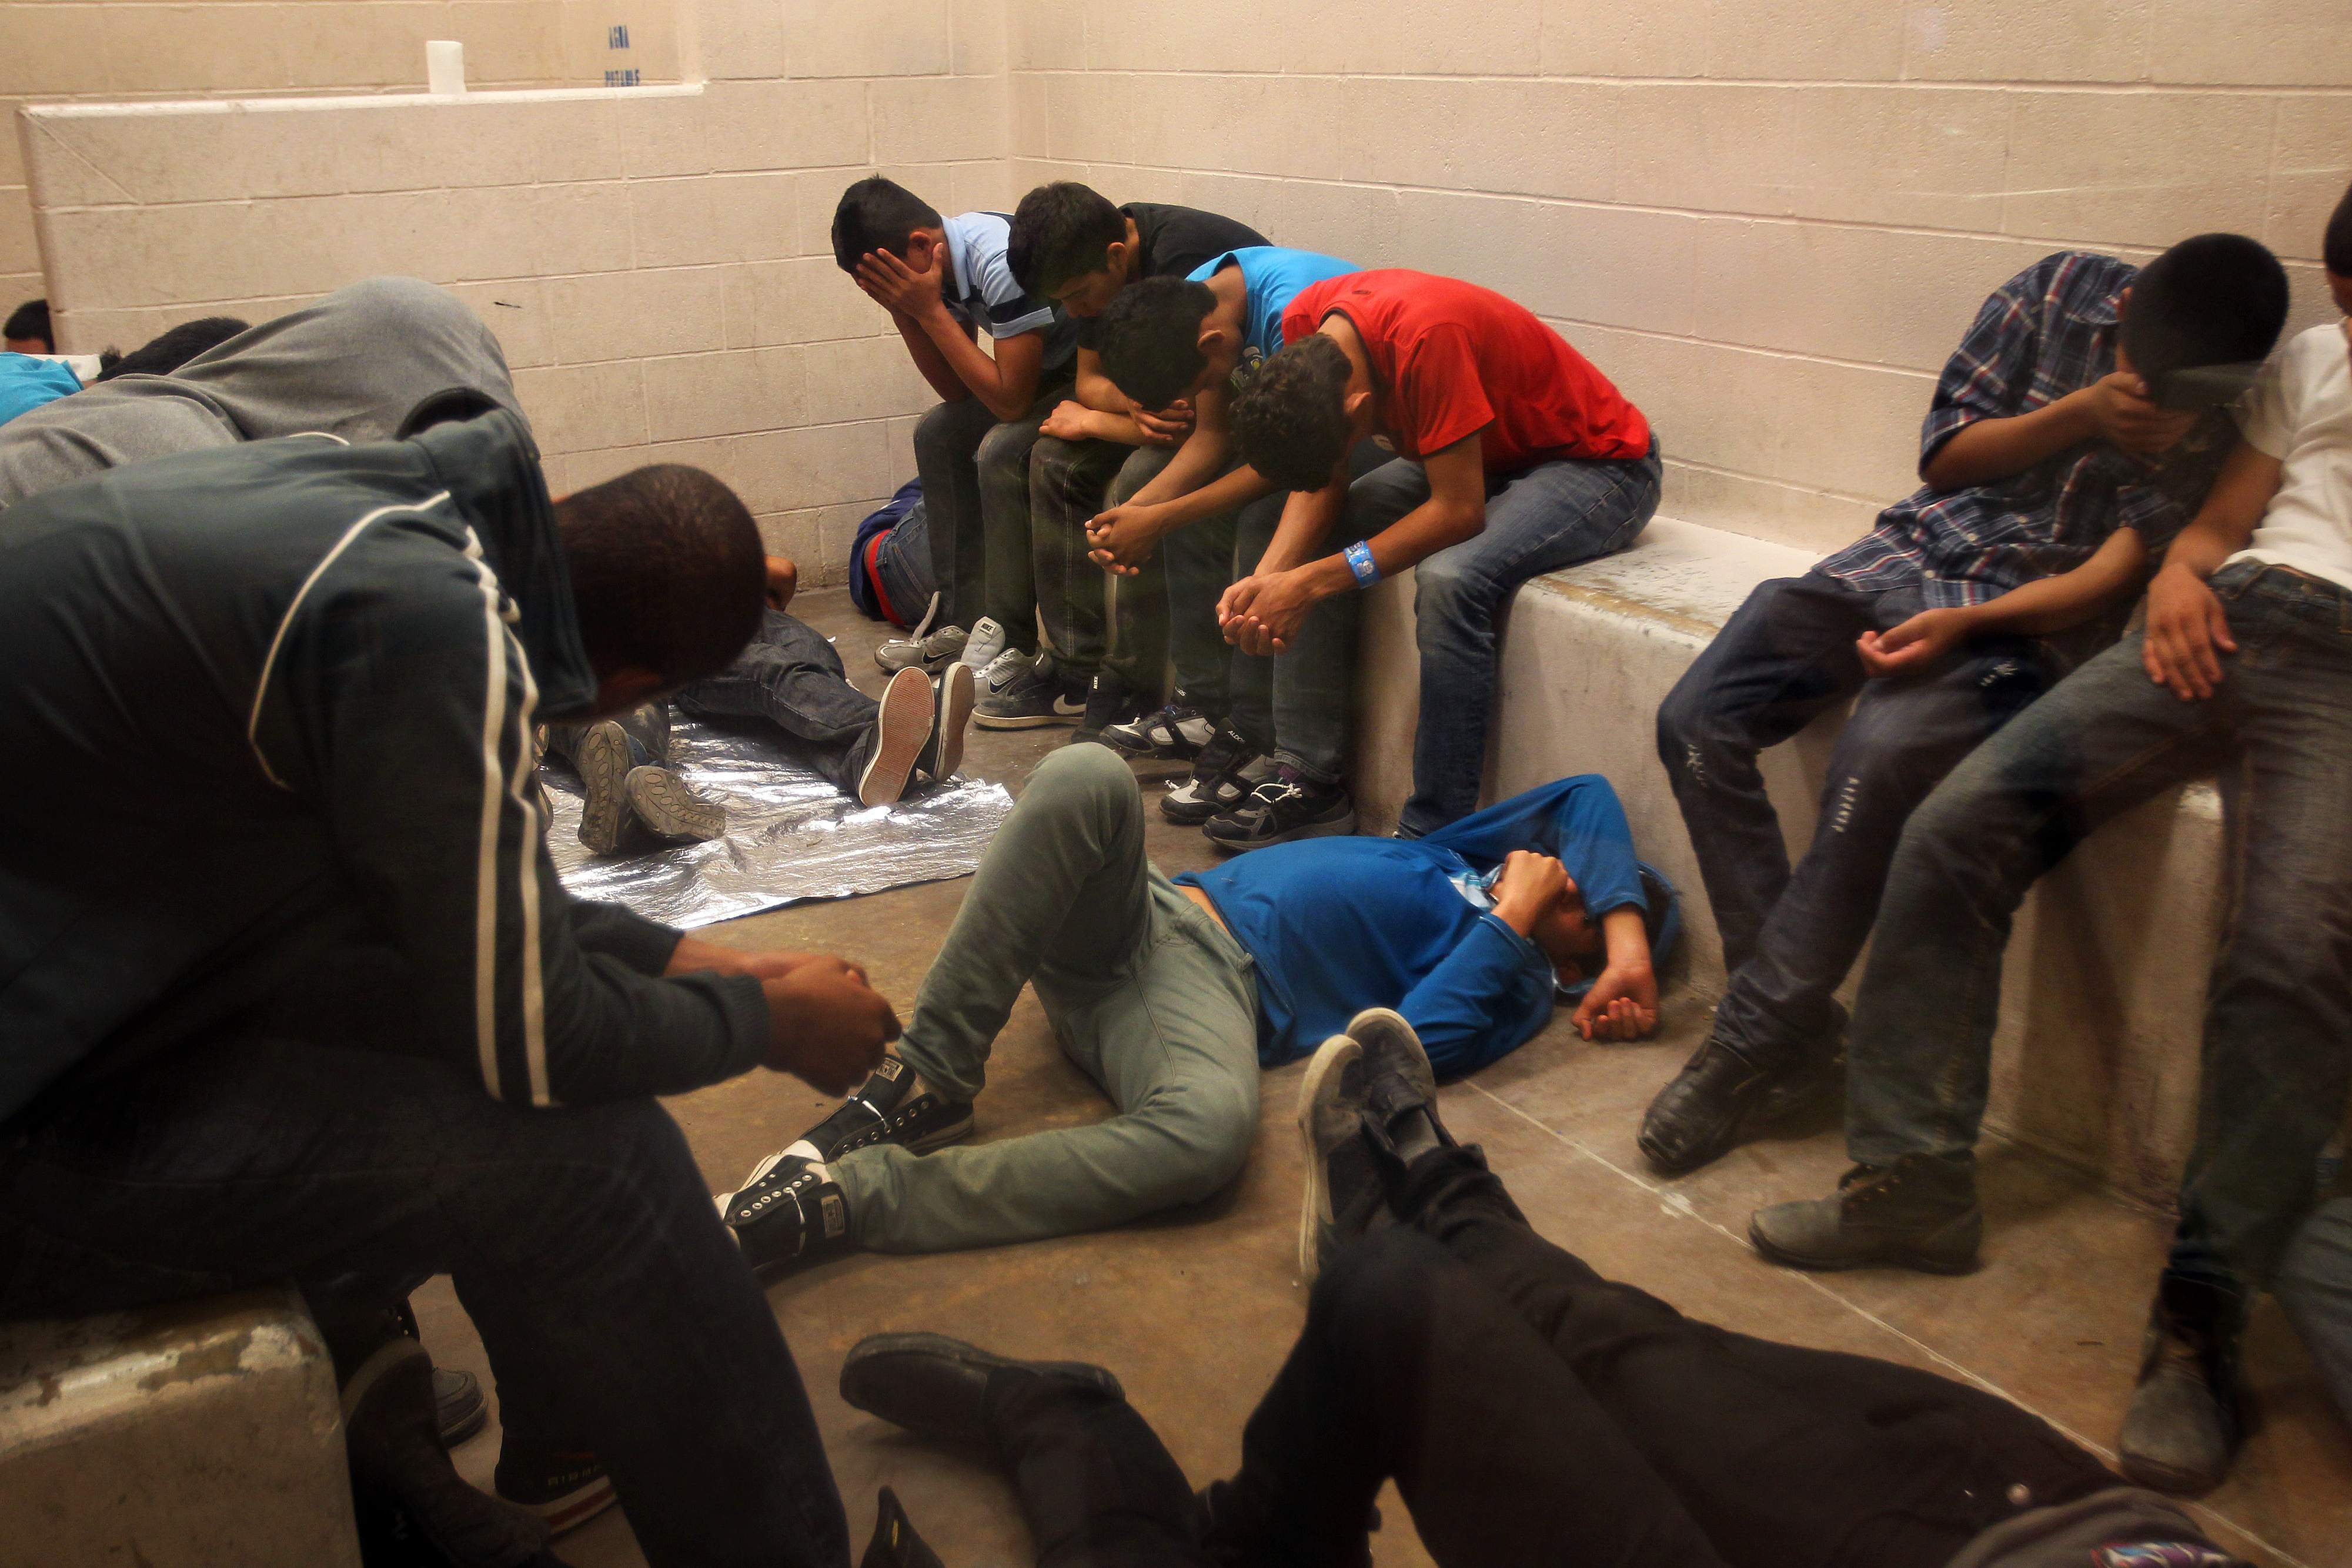 Immigrants who have been caught crossing the border illegally are housed inside the McAllen Border Patrol Station in McAllen, Texas where they are processed on July 15, 2014 in McAllen, Texas. (Pool—Getty Images)